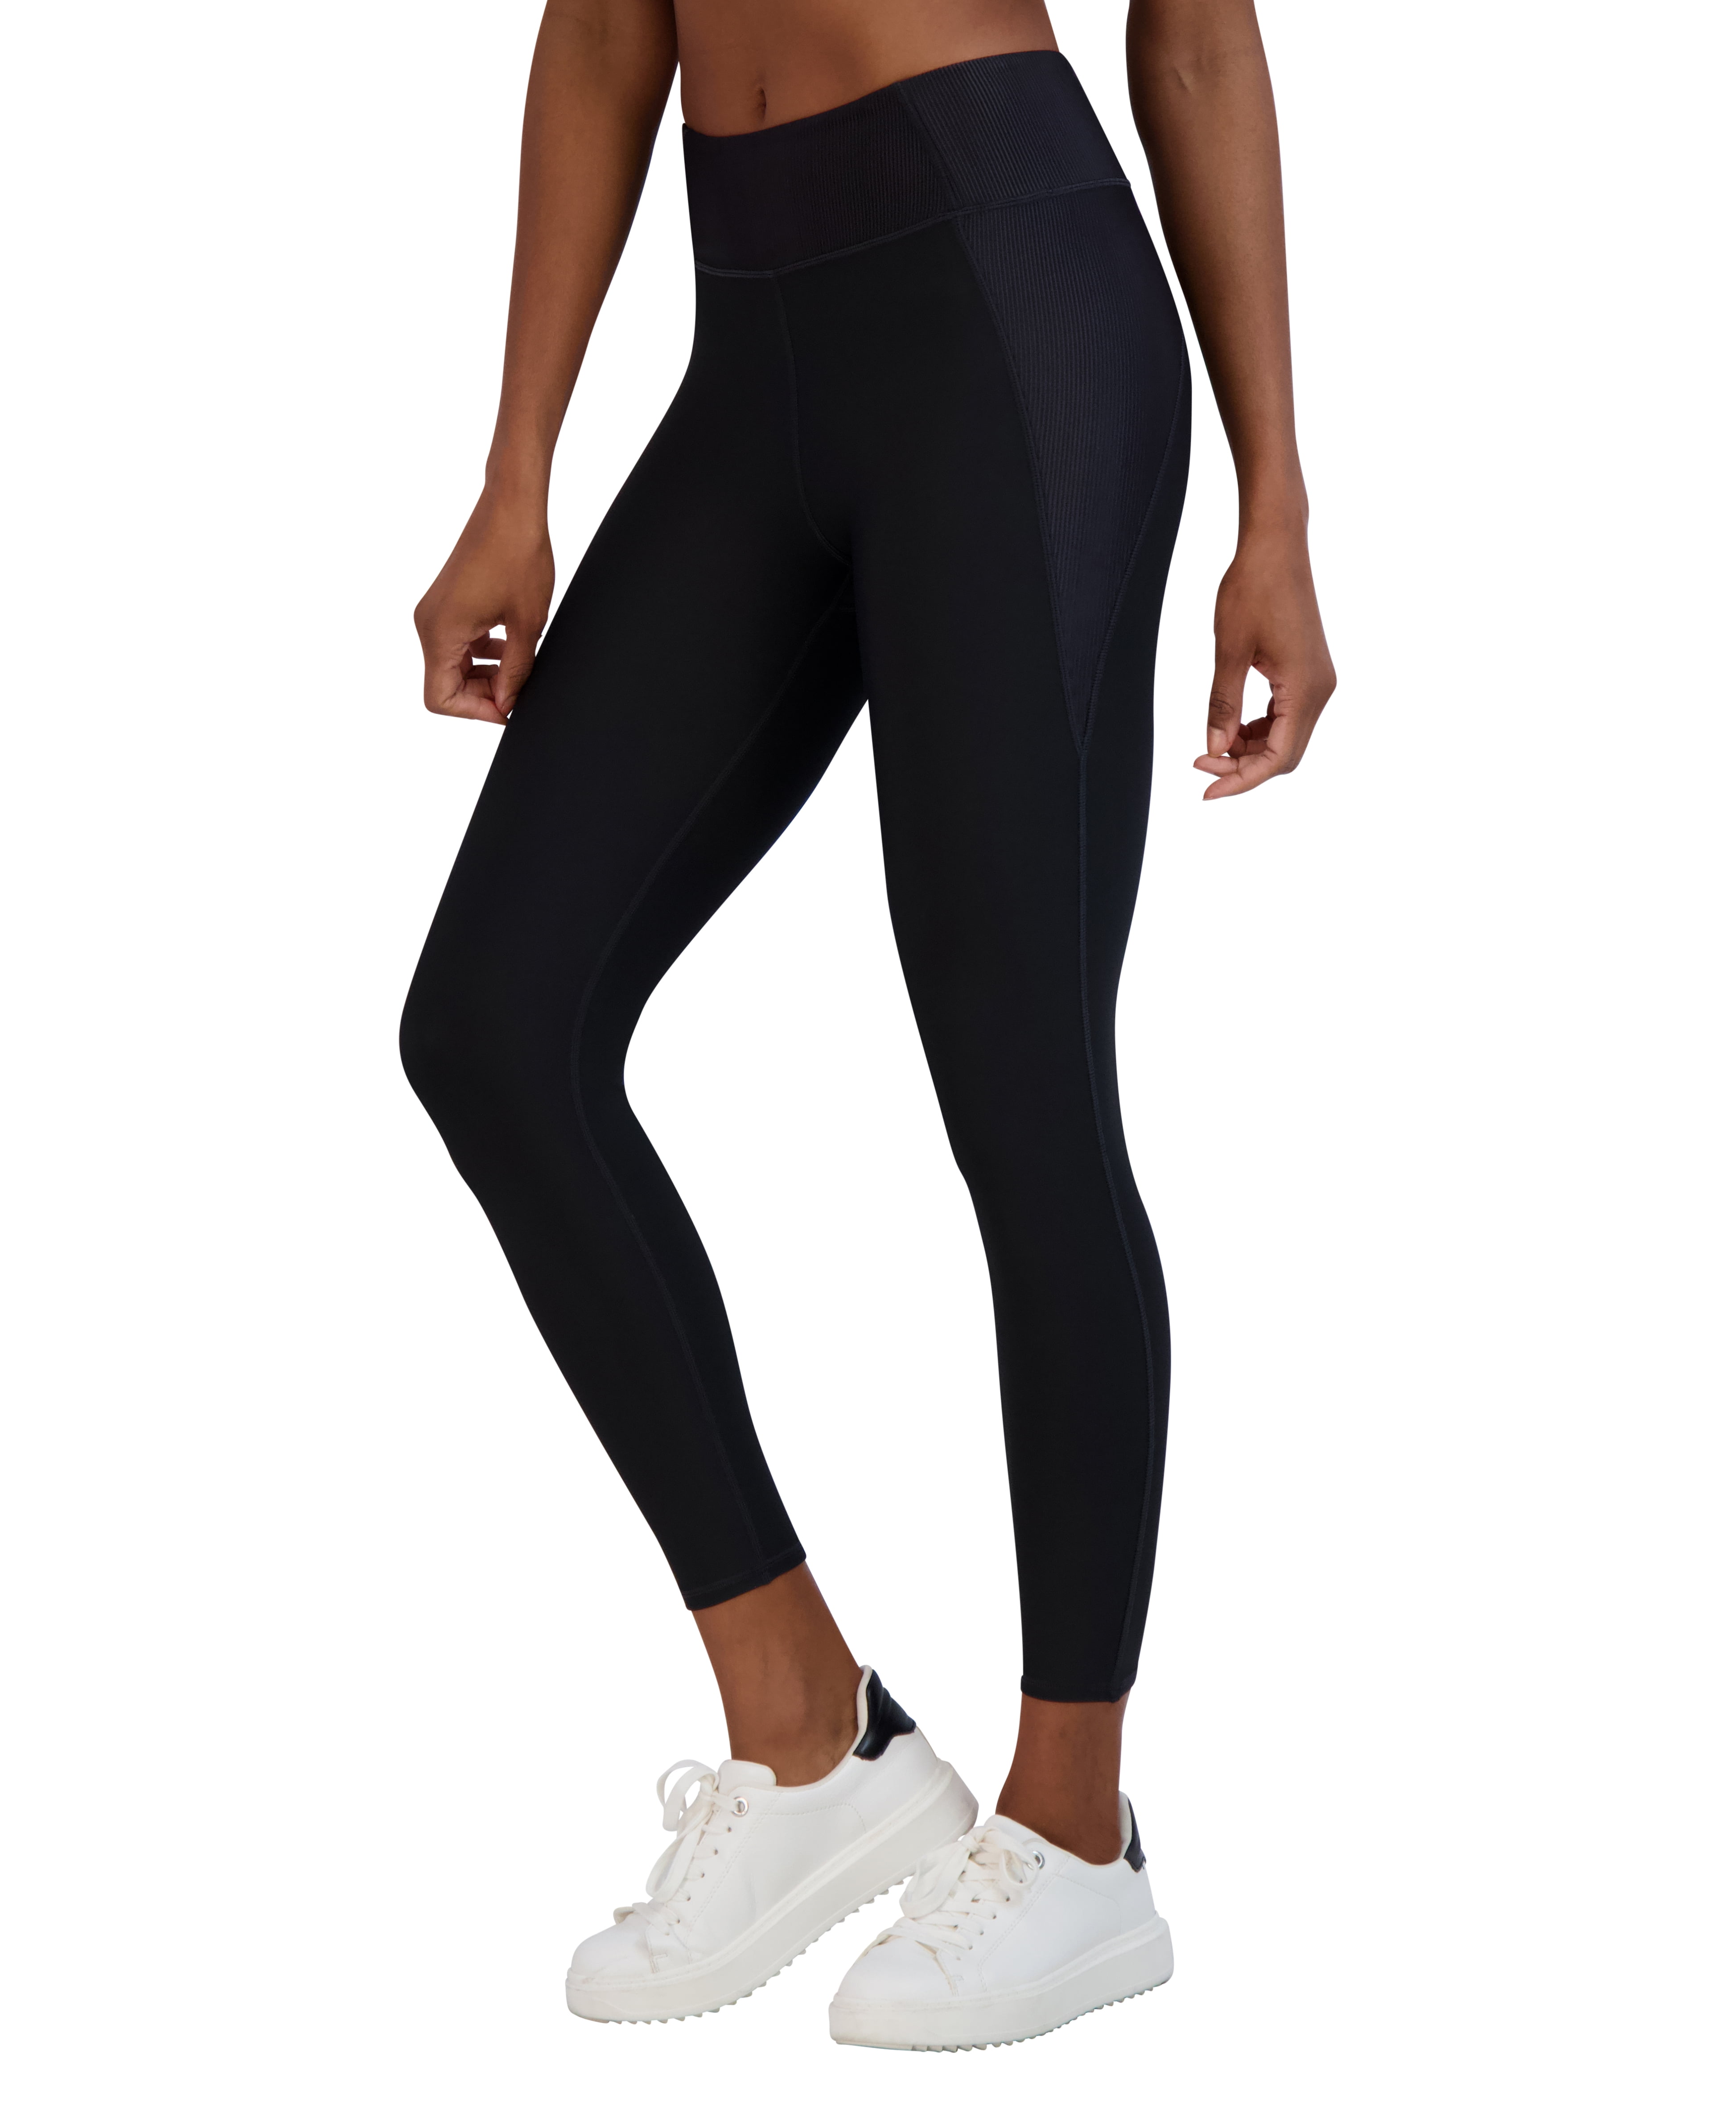 7 of the Best Plus-Size Activewear Brands - PureWow